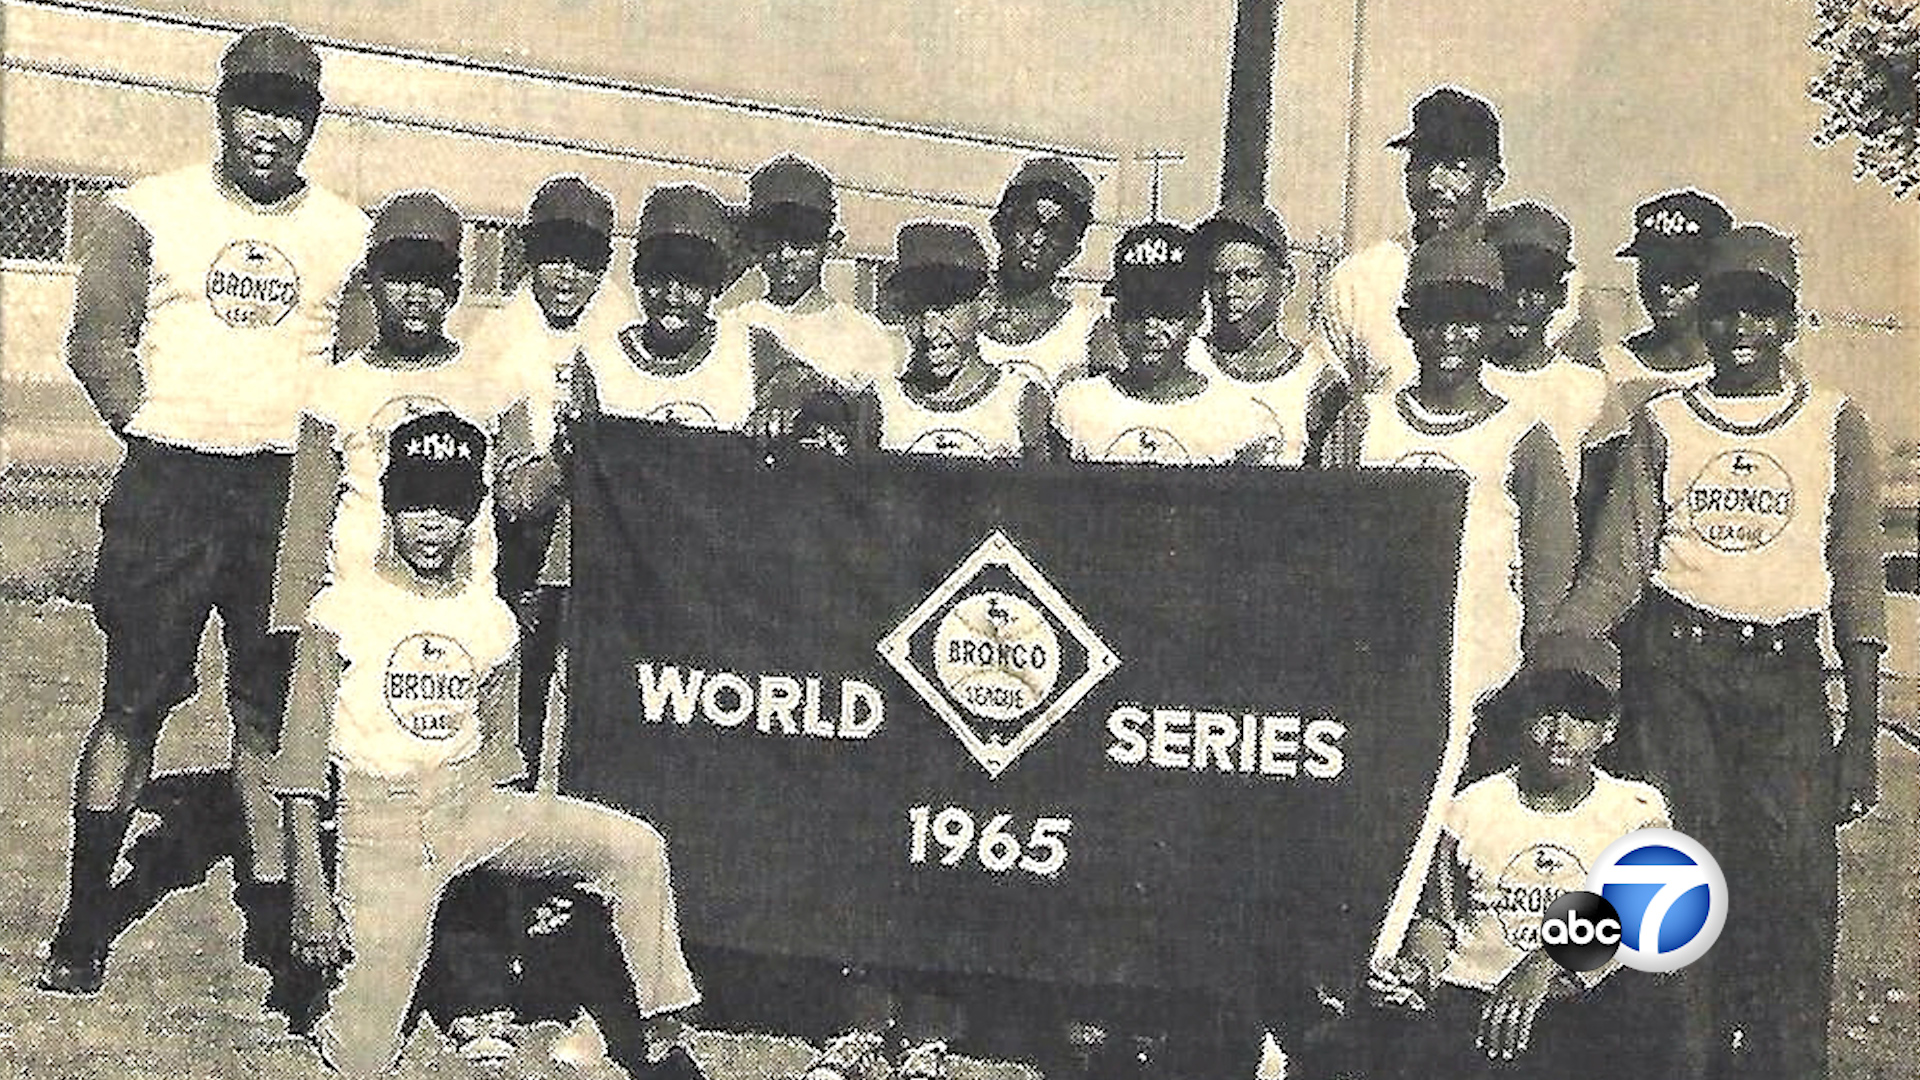 All Black Team Could Be First to Win Little League World Series